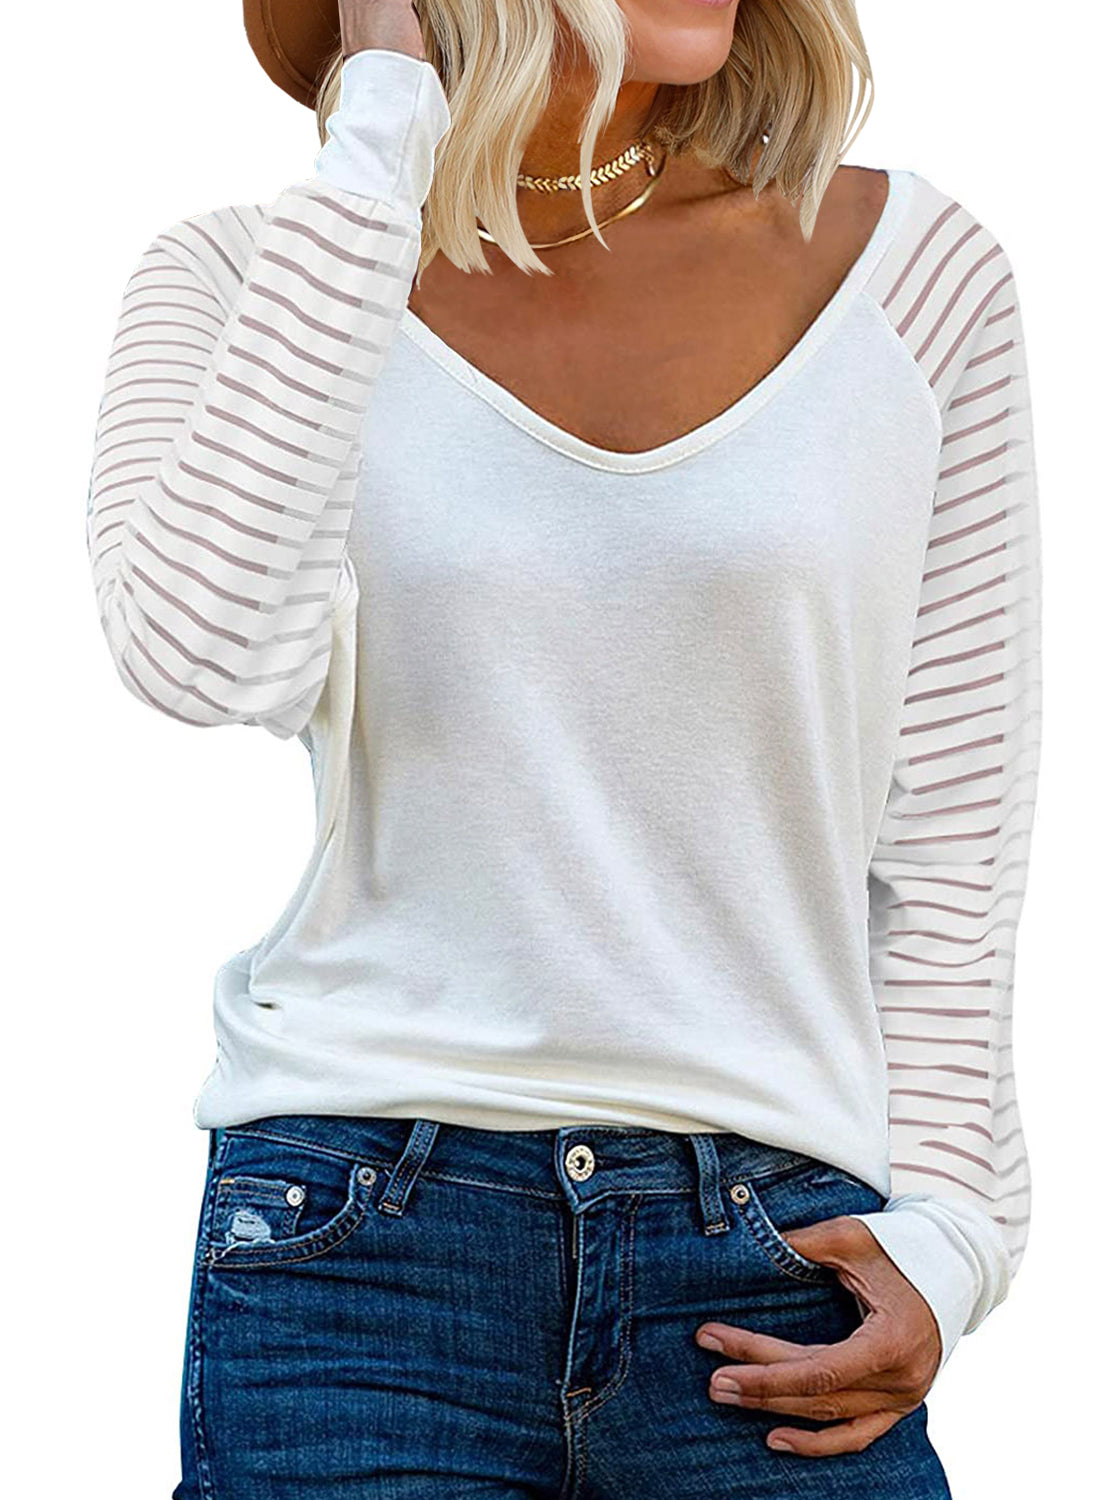 MIHOLL Women’s Long Sleeve Tops Striped Casual Loose Blouses T Shirts